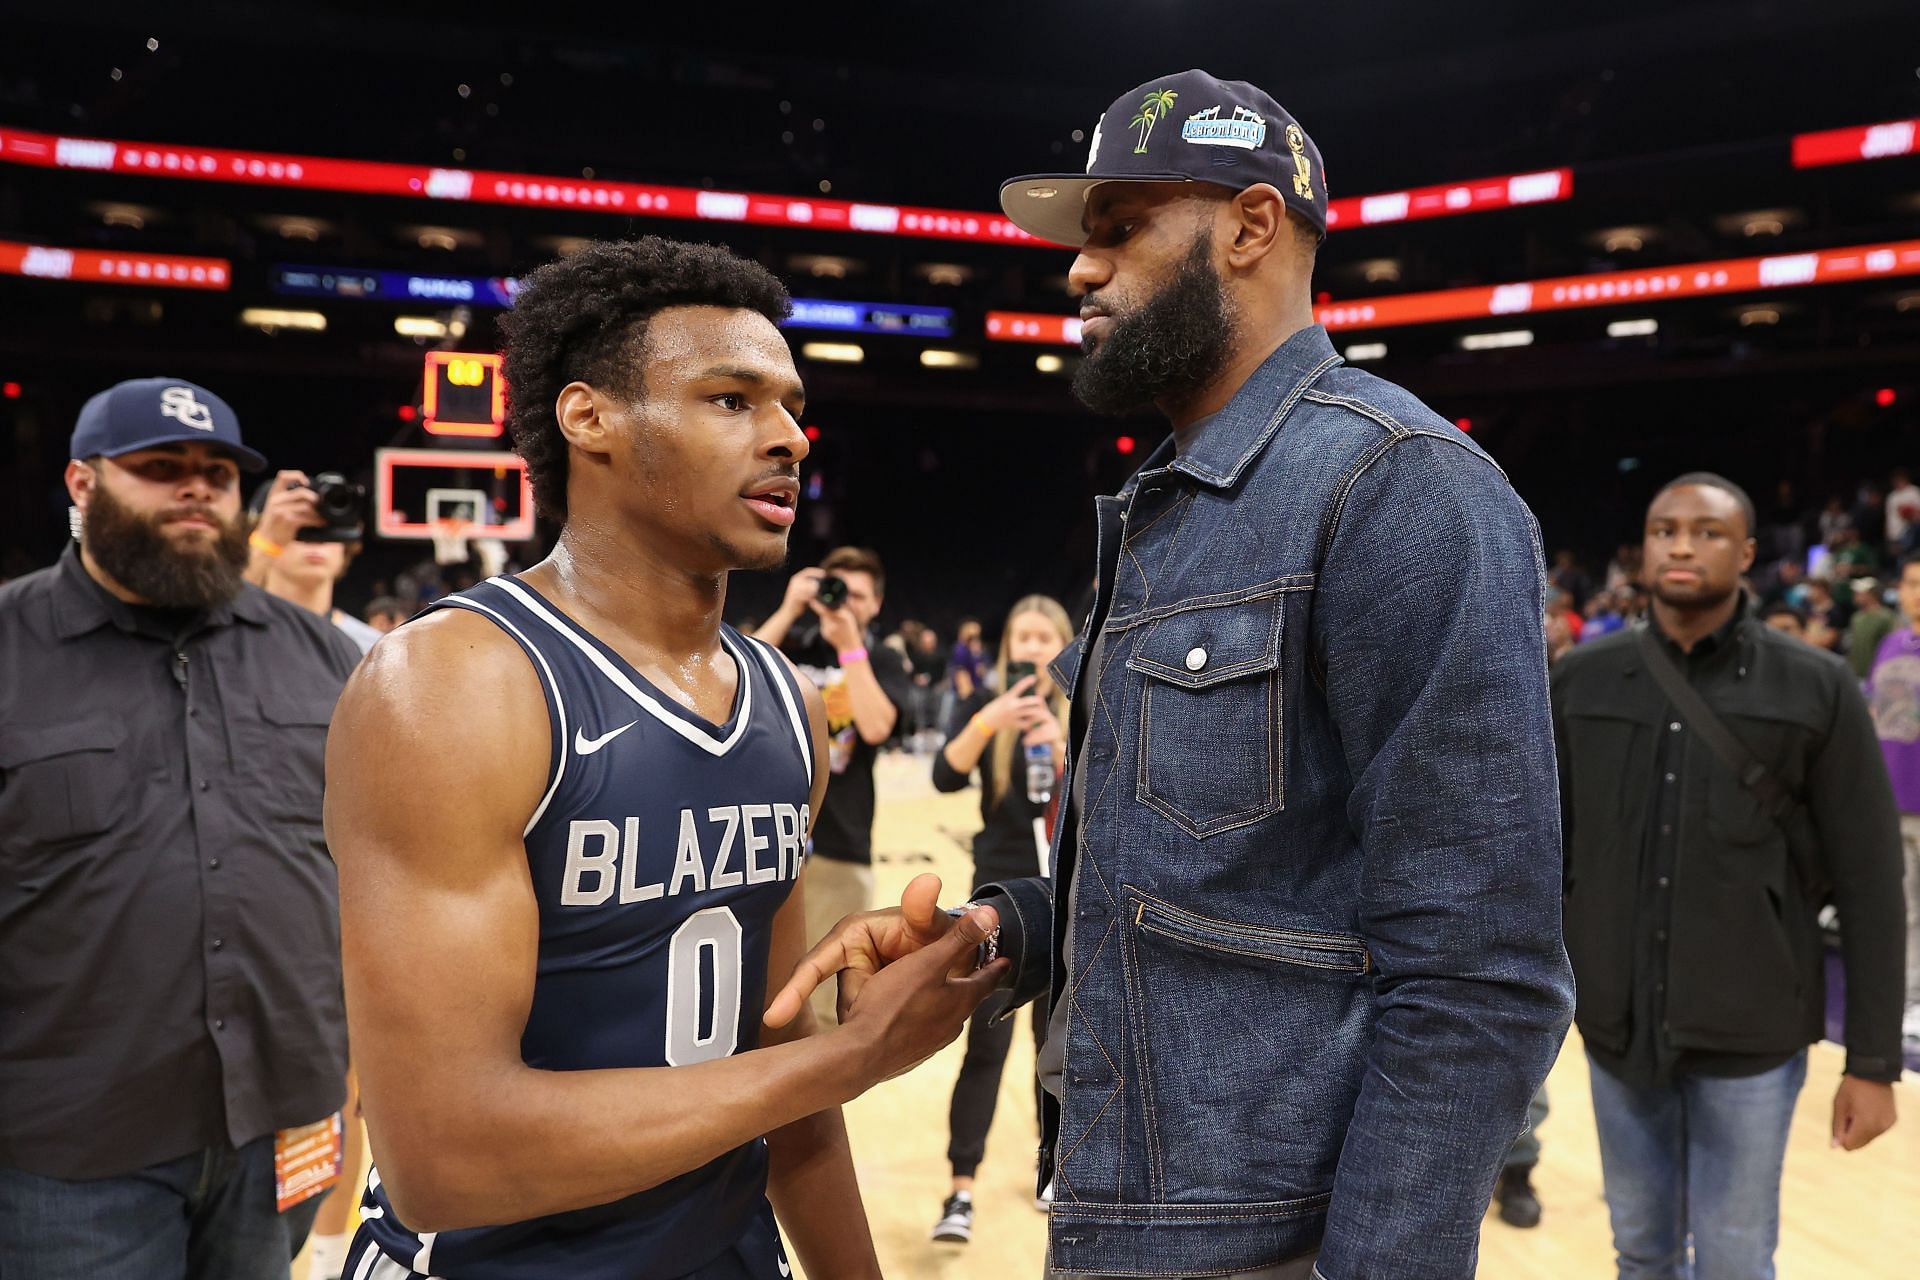 Bronny James of the Sierra Canyon Trailblazers is greeted by his father LeBron James.